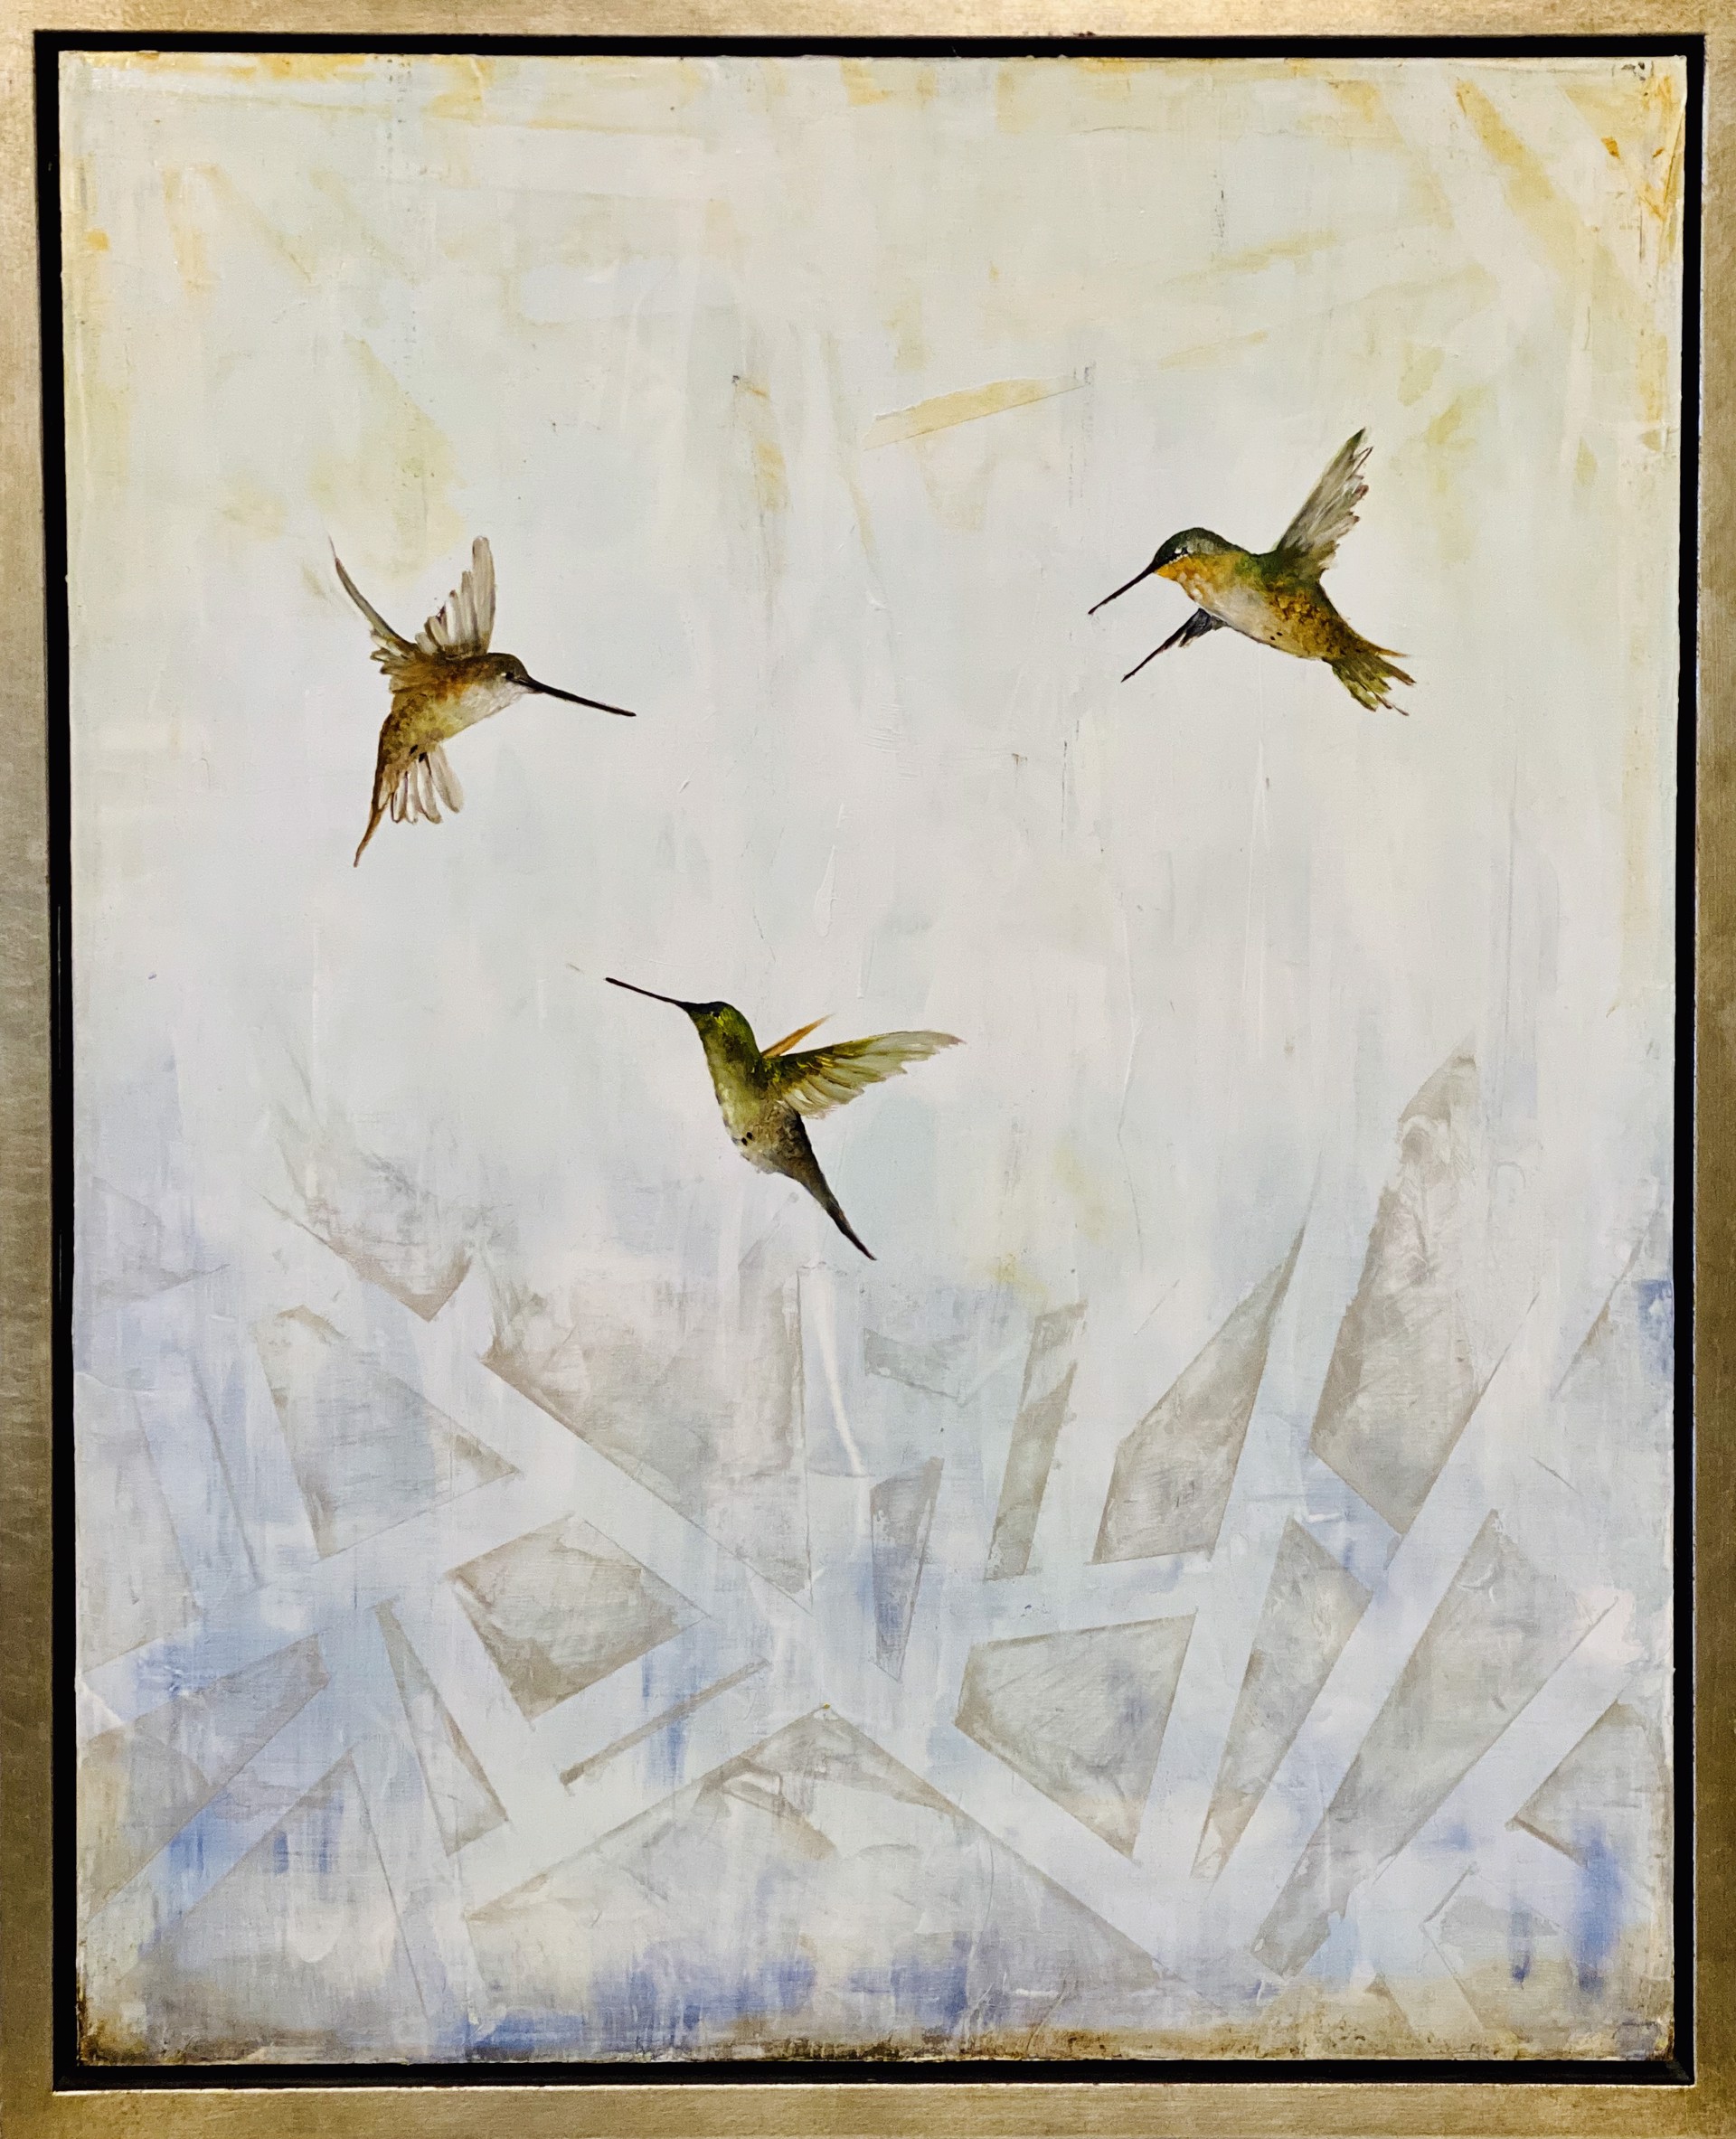 A Contemporary Oil Painting Of Three Hummingbirds Flying By Jenna Von Benedikt Available At Gallery Wild